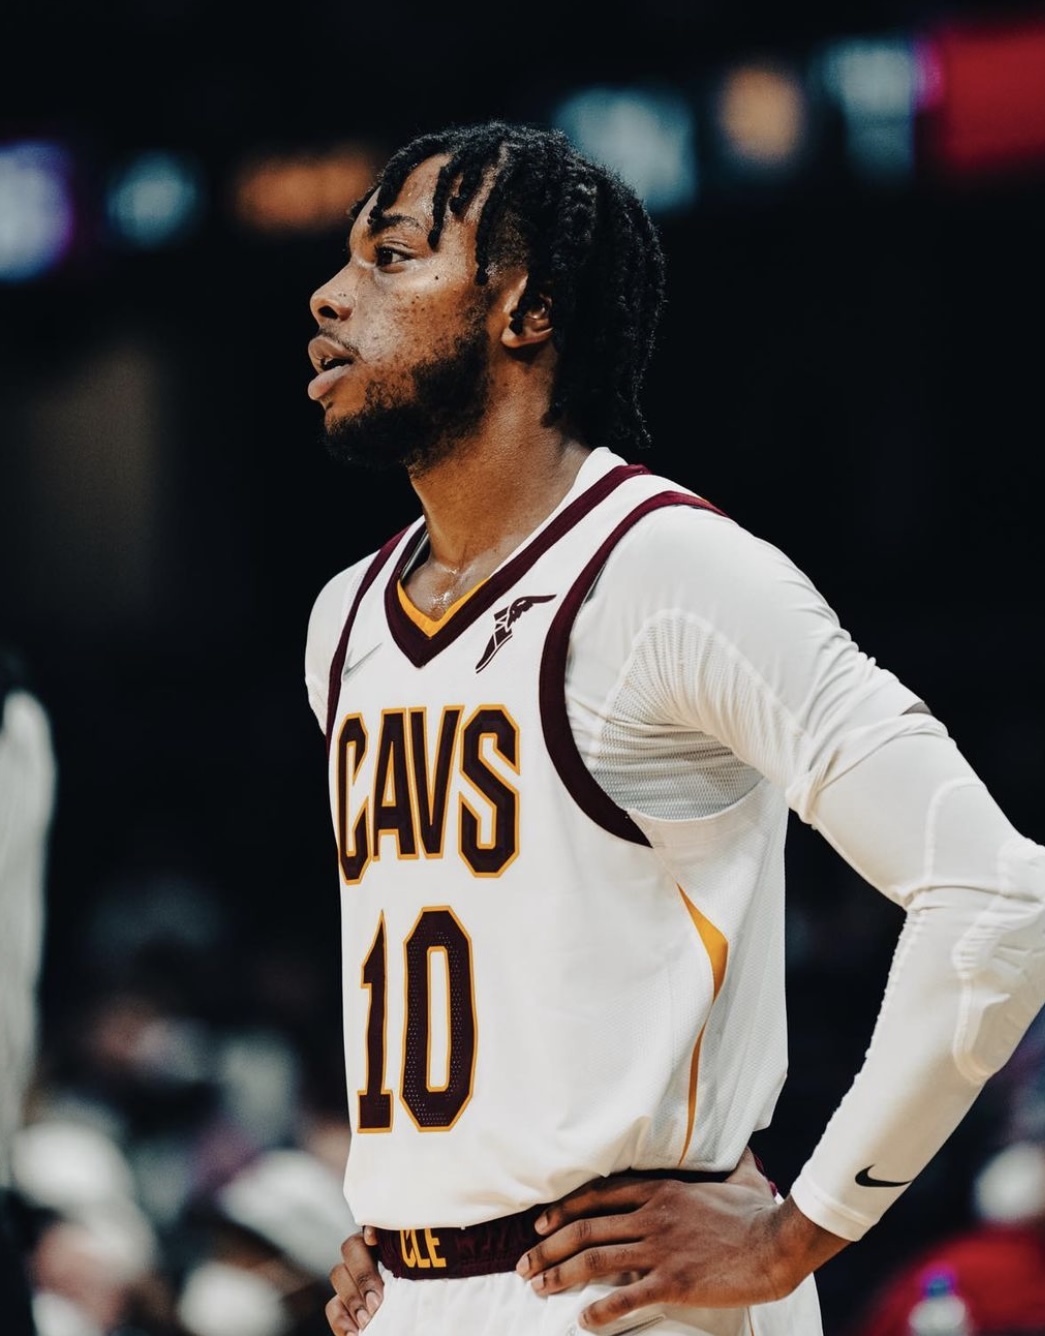 Explore The Lifestory Of Darius Garland, The Star Basketball Player Of The Cleveland Cavaliers